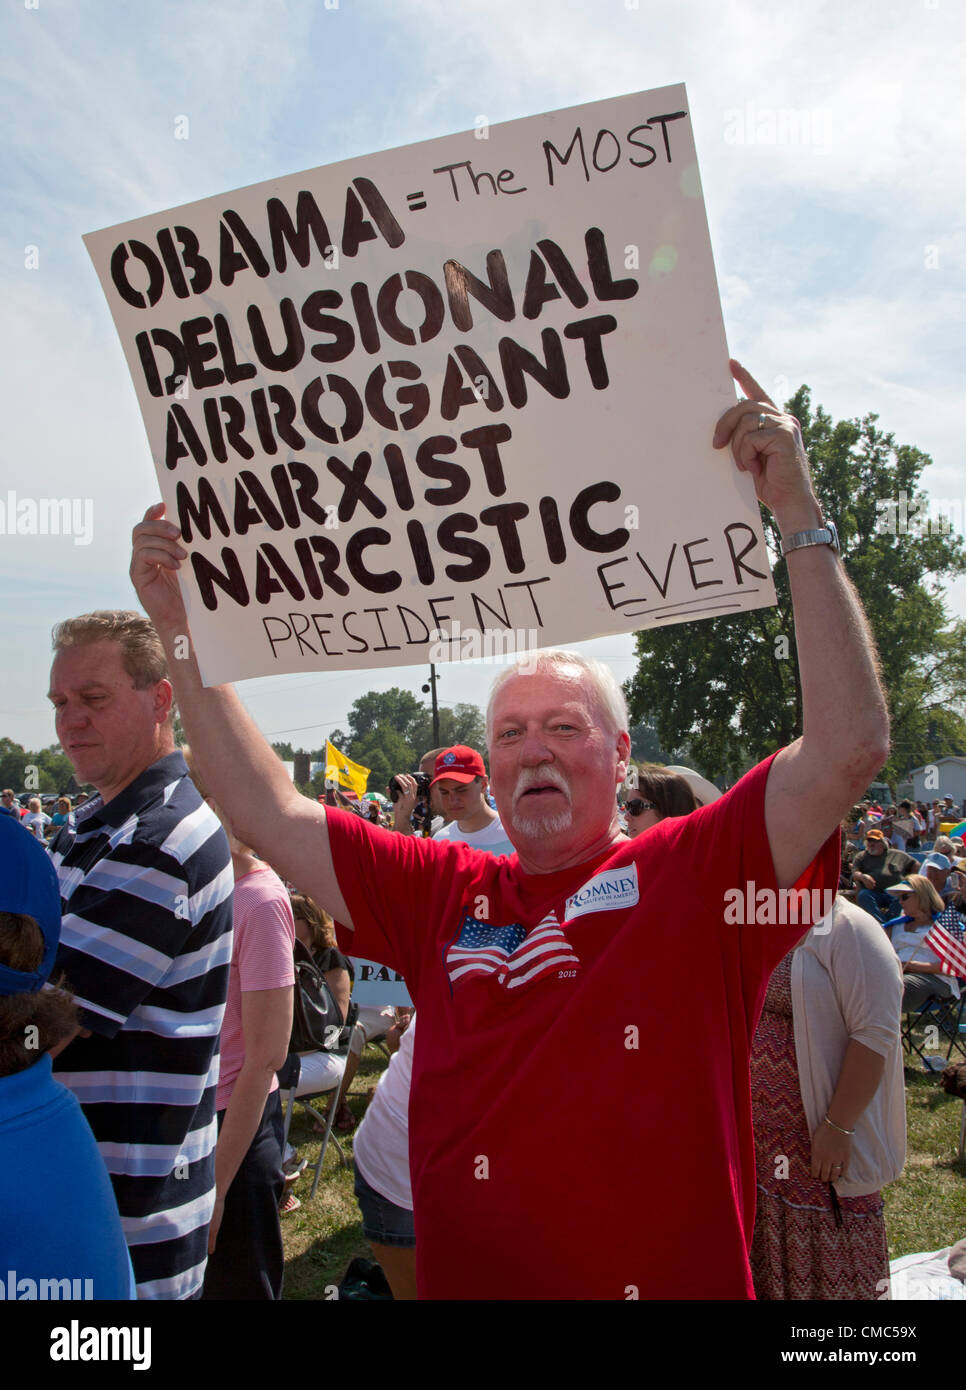 Belleville, Michigan - July 14, 2012 - A 'Patriots in the Park' rally, organized by the Tea Party and Americans for Prosperity. The rally was addressed by former Alaska Governor Sarah Palin. Stock Photo